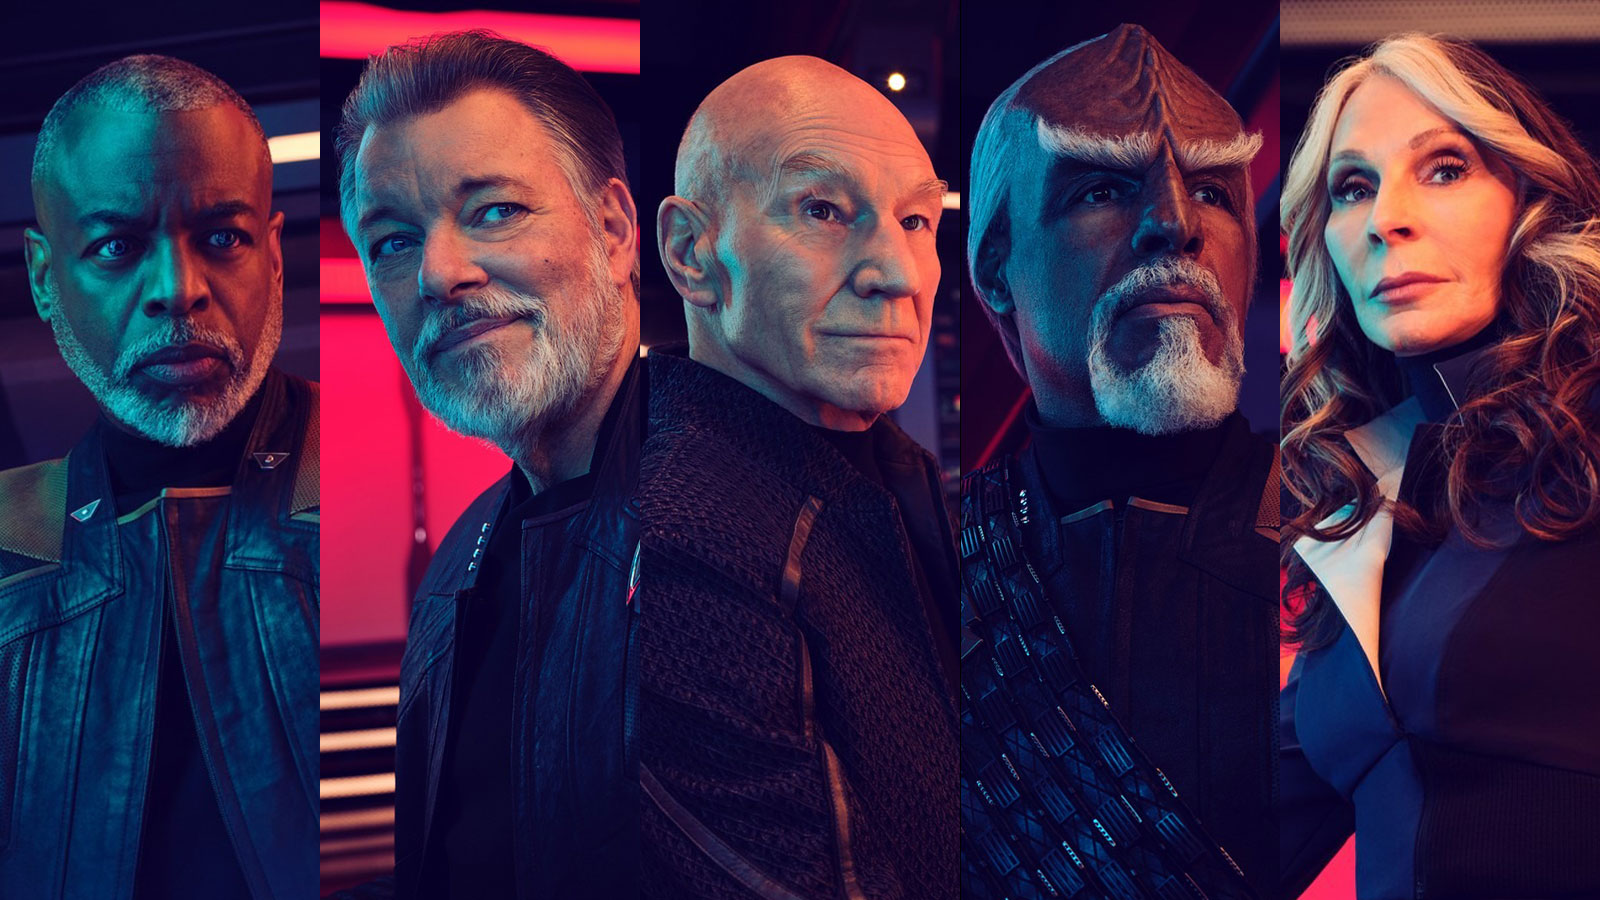 Star Trek: Picard Season 3 cast featured in new character images